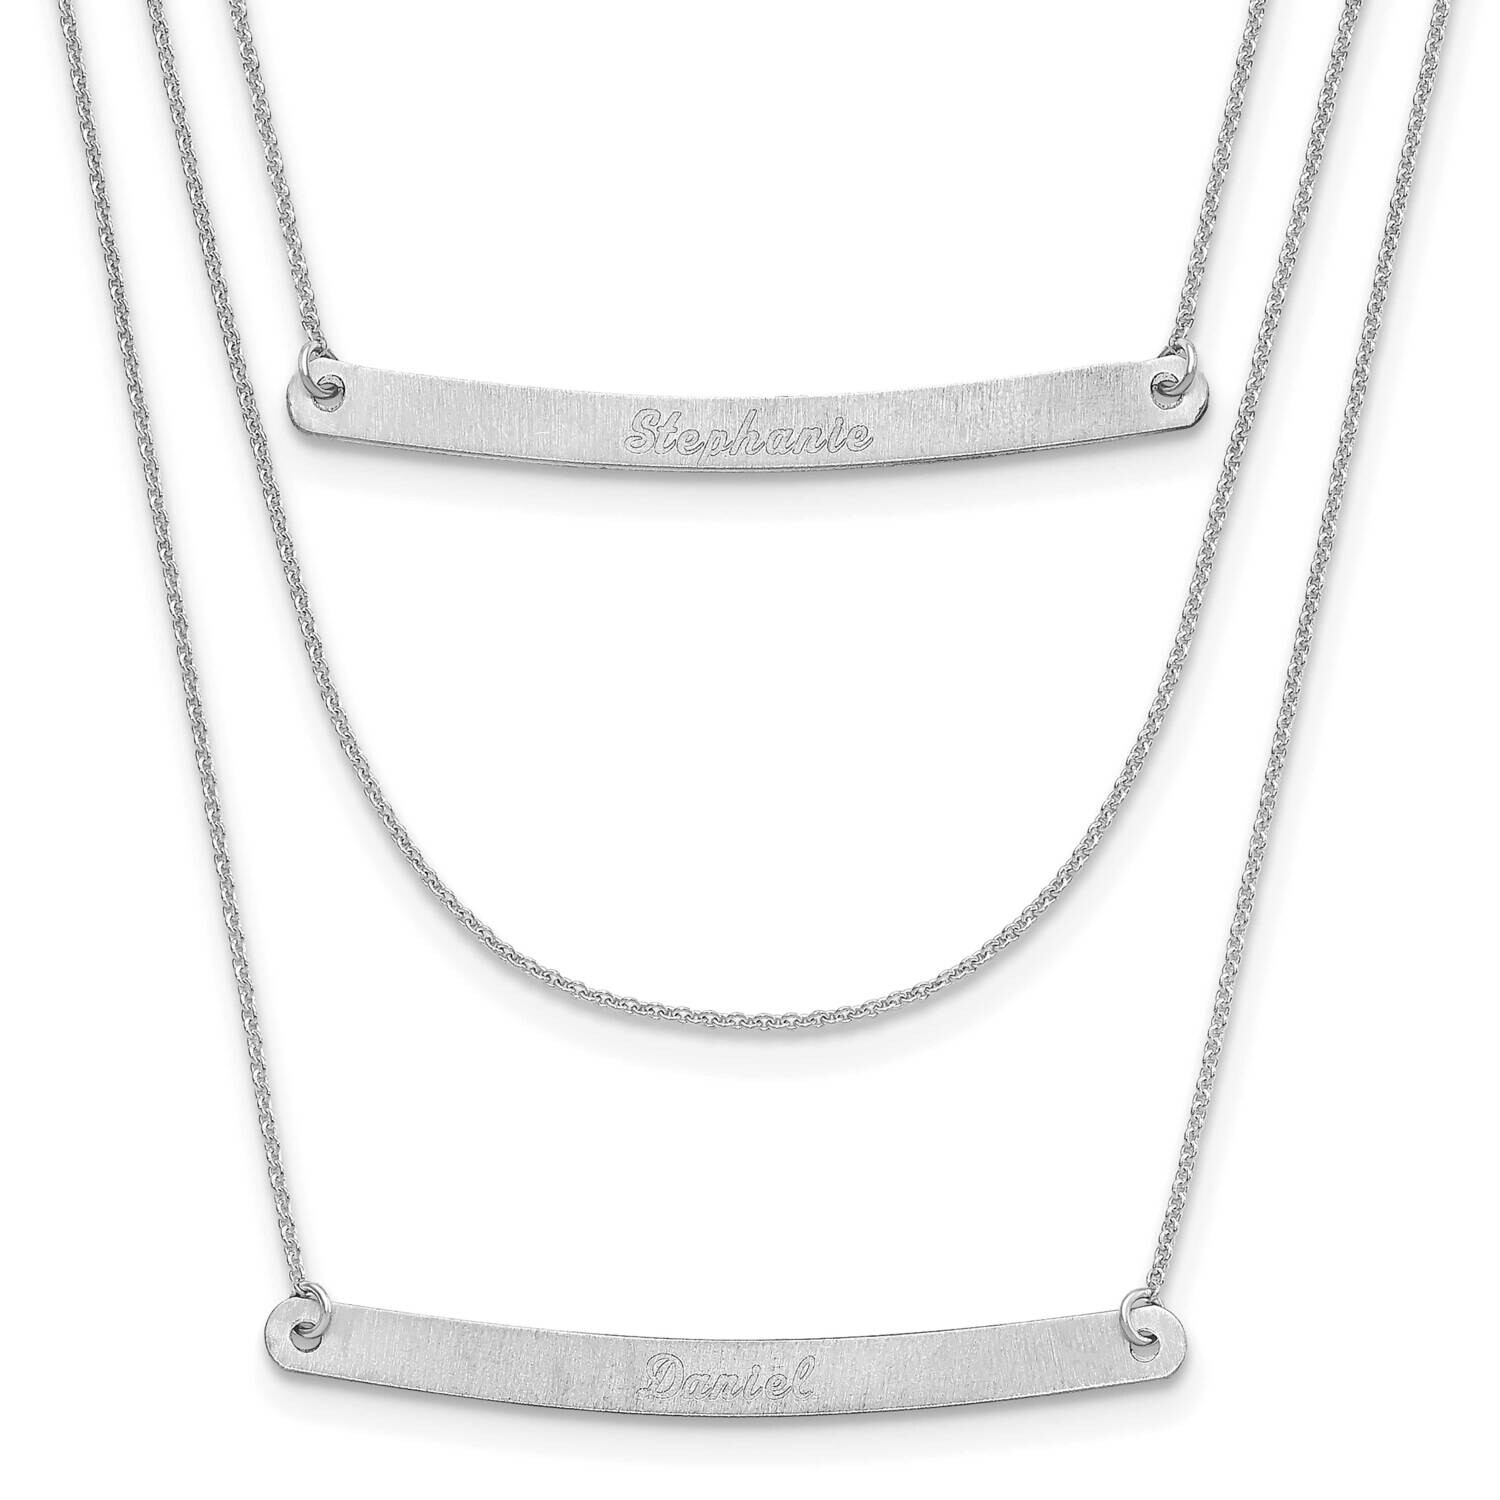 Brushed 3 Chain 2 Bars Necklace 14k White Gold XNA652W